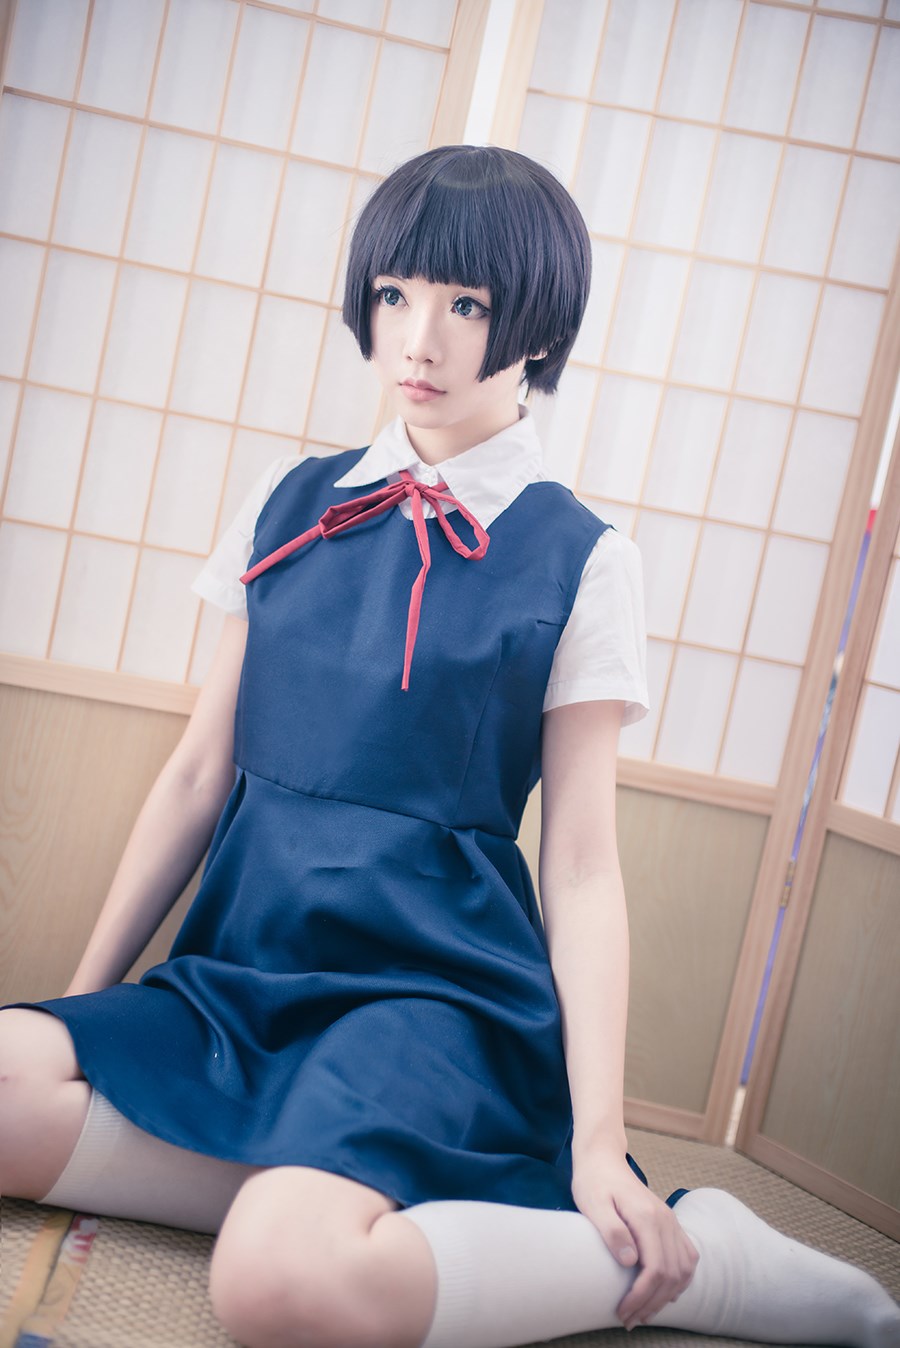 Star's Delay to December 22, Coser Hoshilly BCY Collection 10(86)